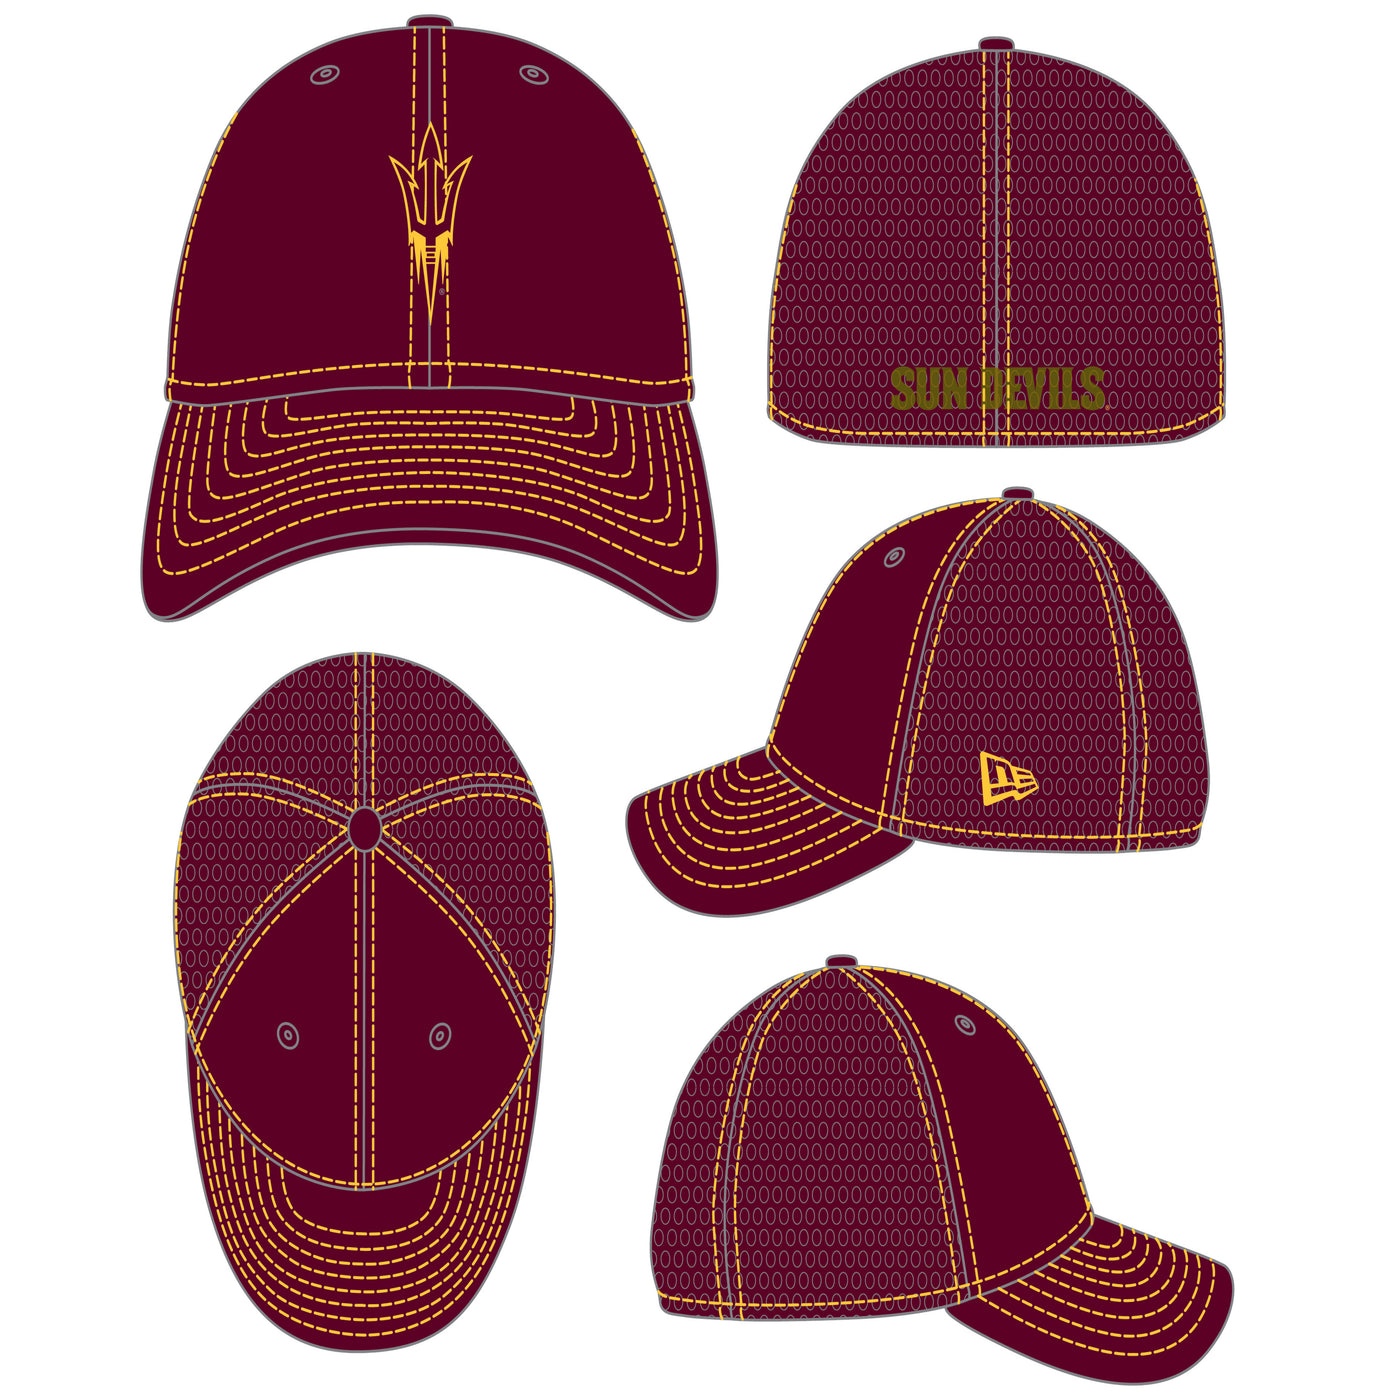 Digital rendition of front, back, left, right, and view from above of the ASU maroon strectch fit hat with darker maroon mesh on back panels and a gold outlined pitchfork on the front